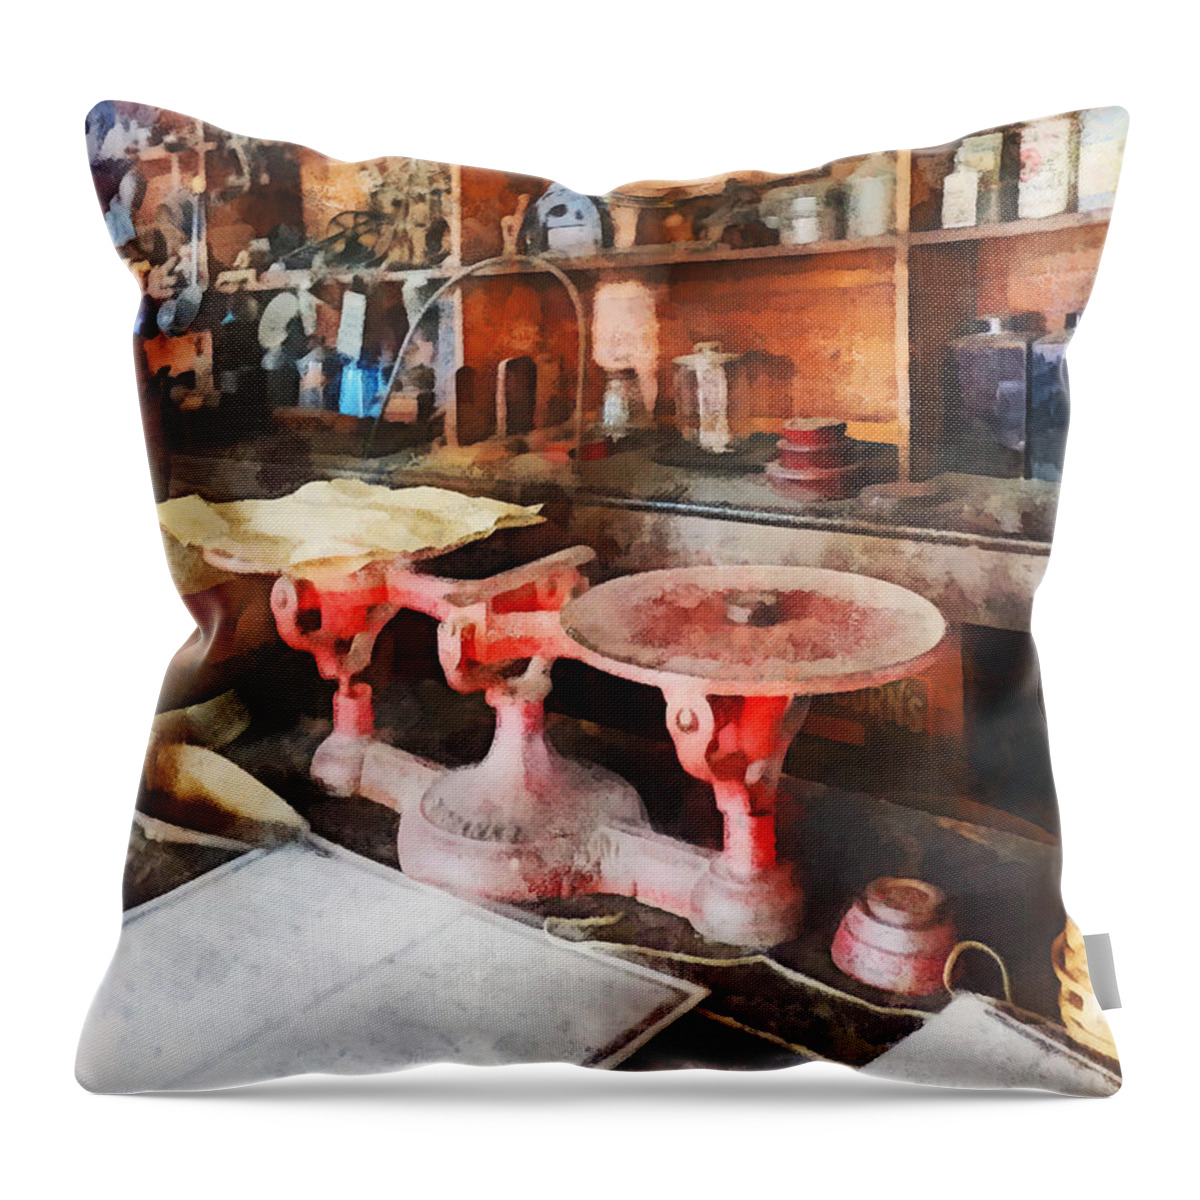 Scale Throw Pillow featuring the photograph Balance Scale in General Store by Susan Savad